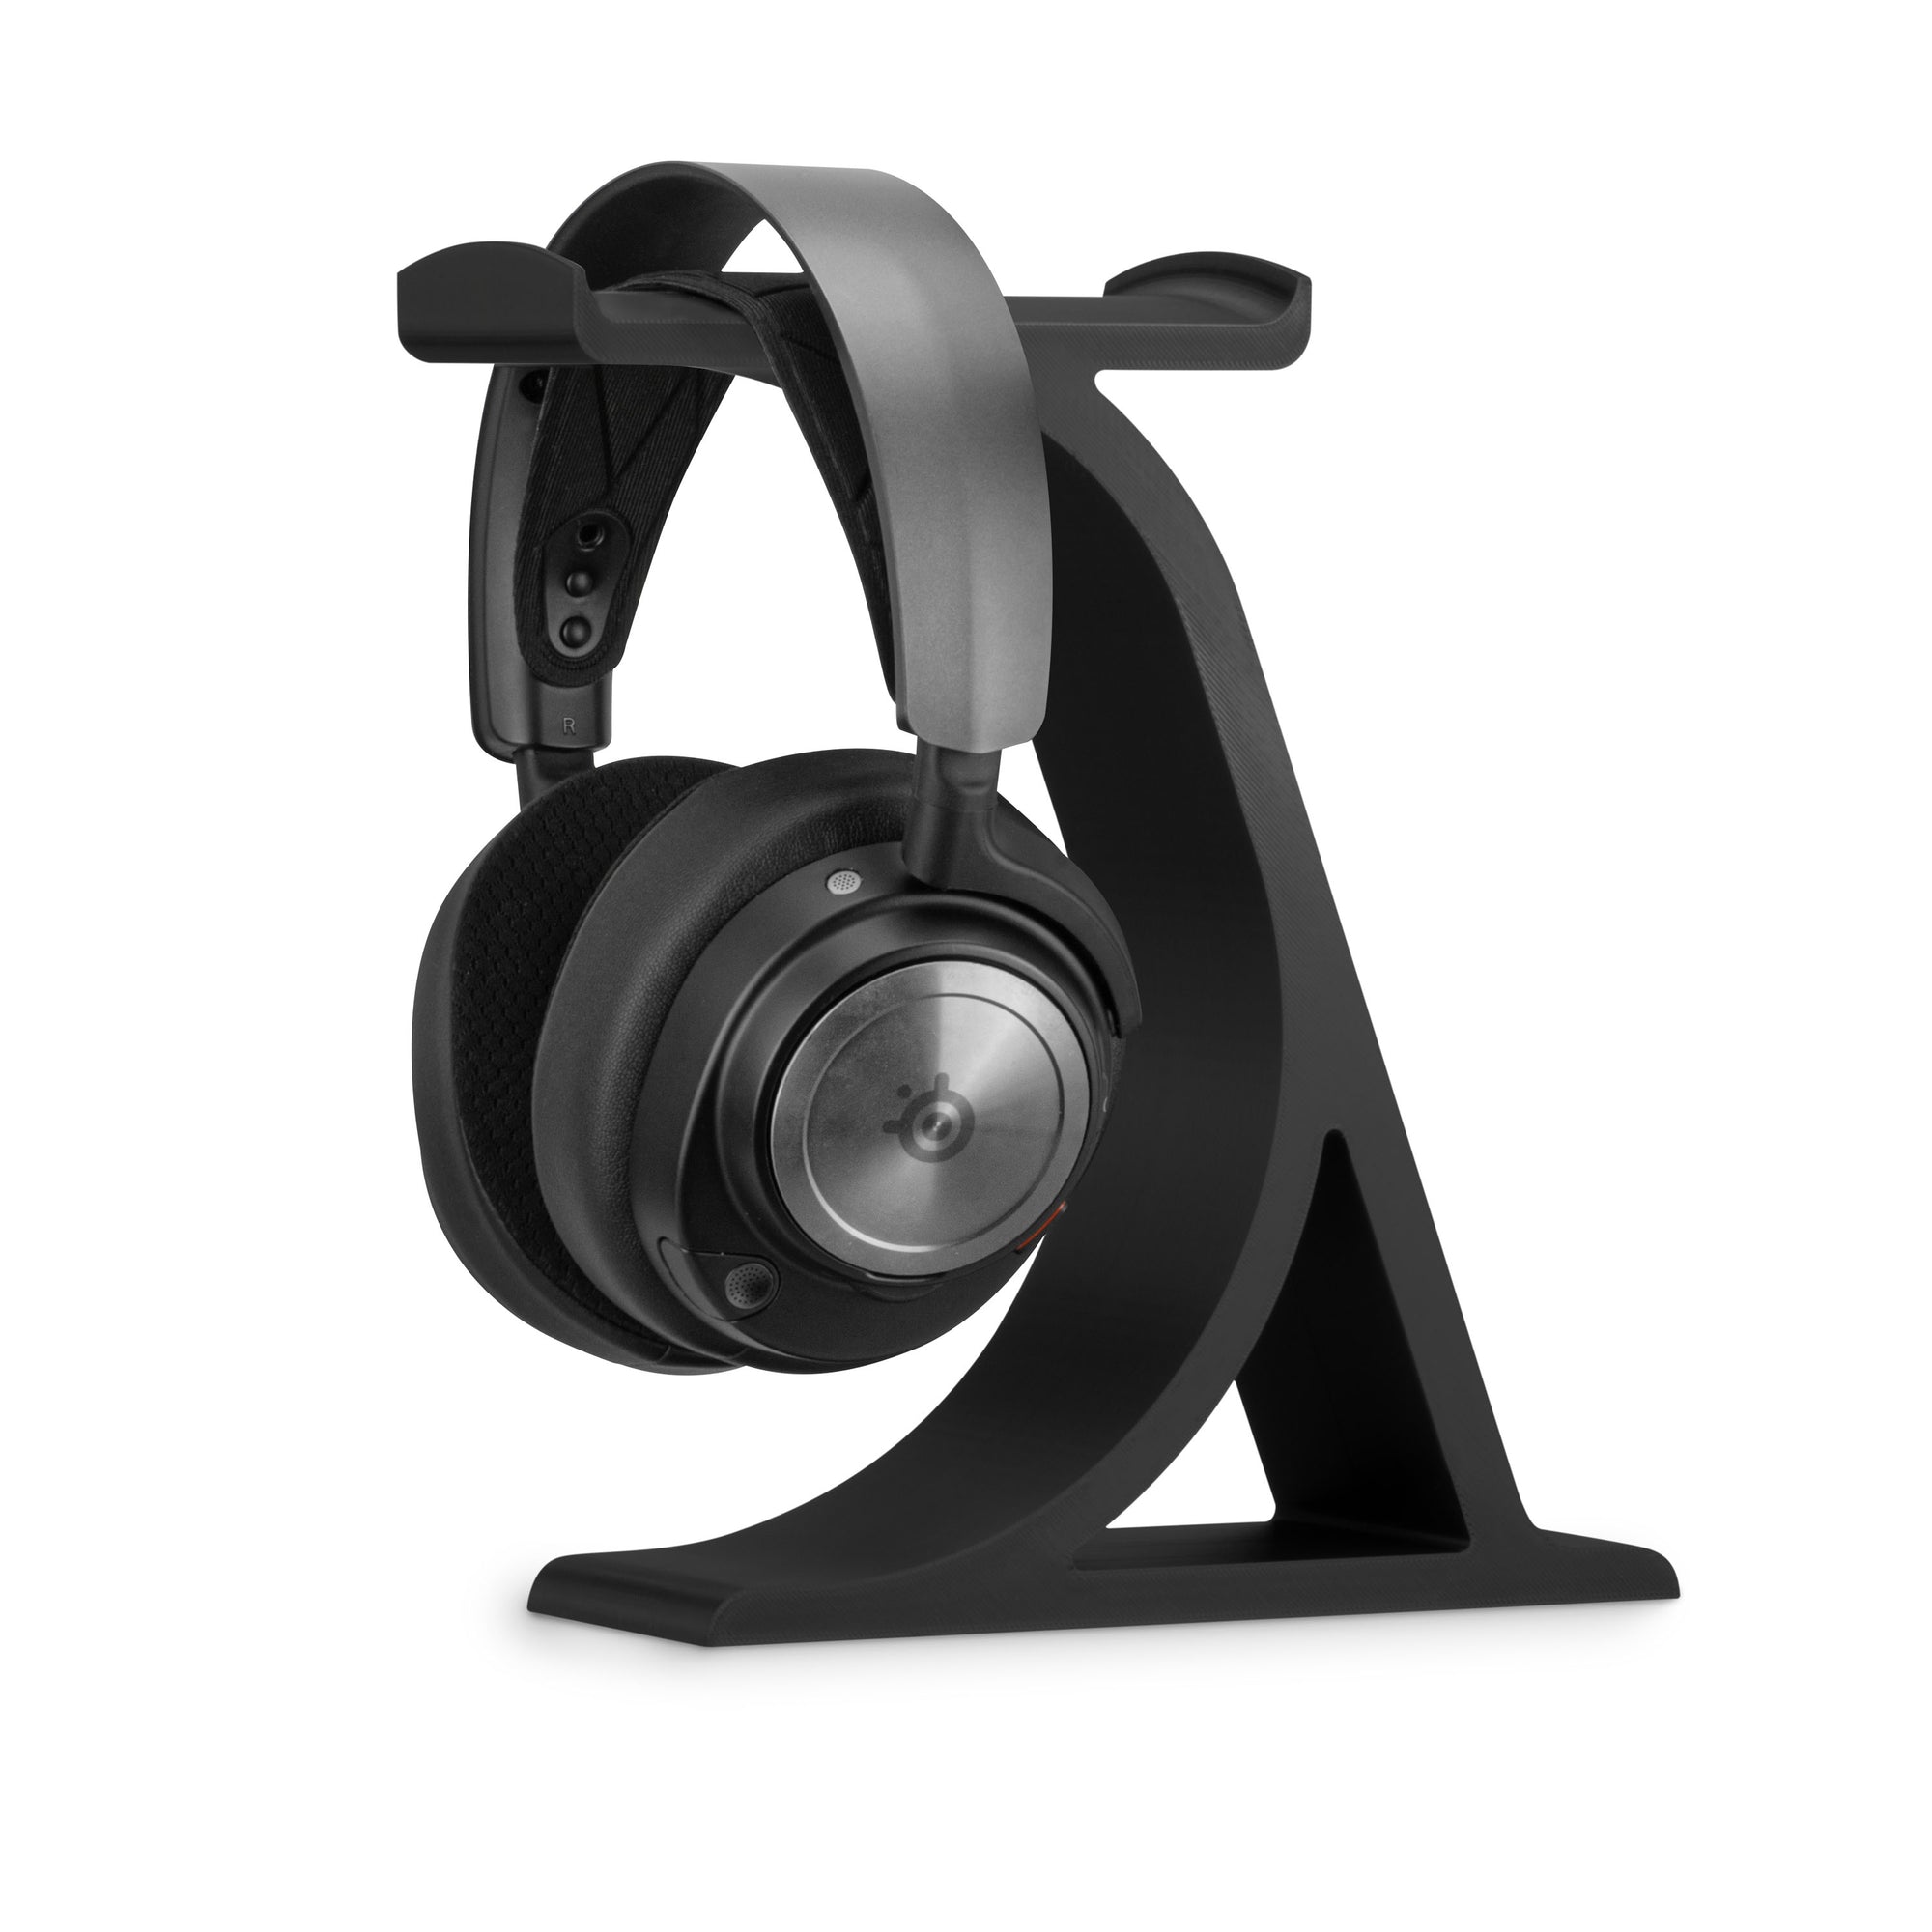 The CSTAND - Headphone Stand for Desks - Universal Design for All Gaming & Audio Headsets